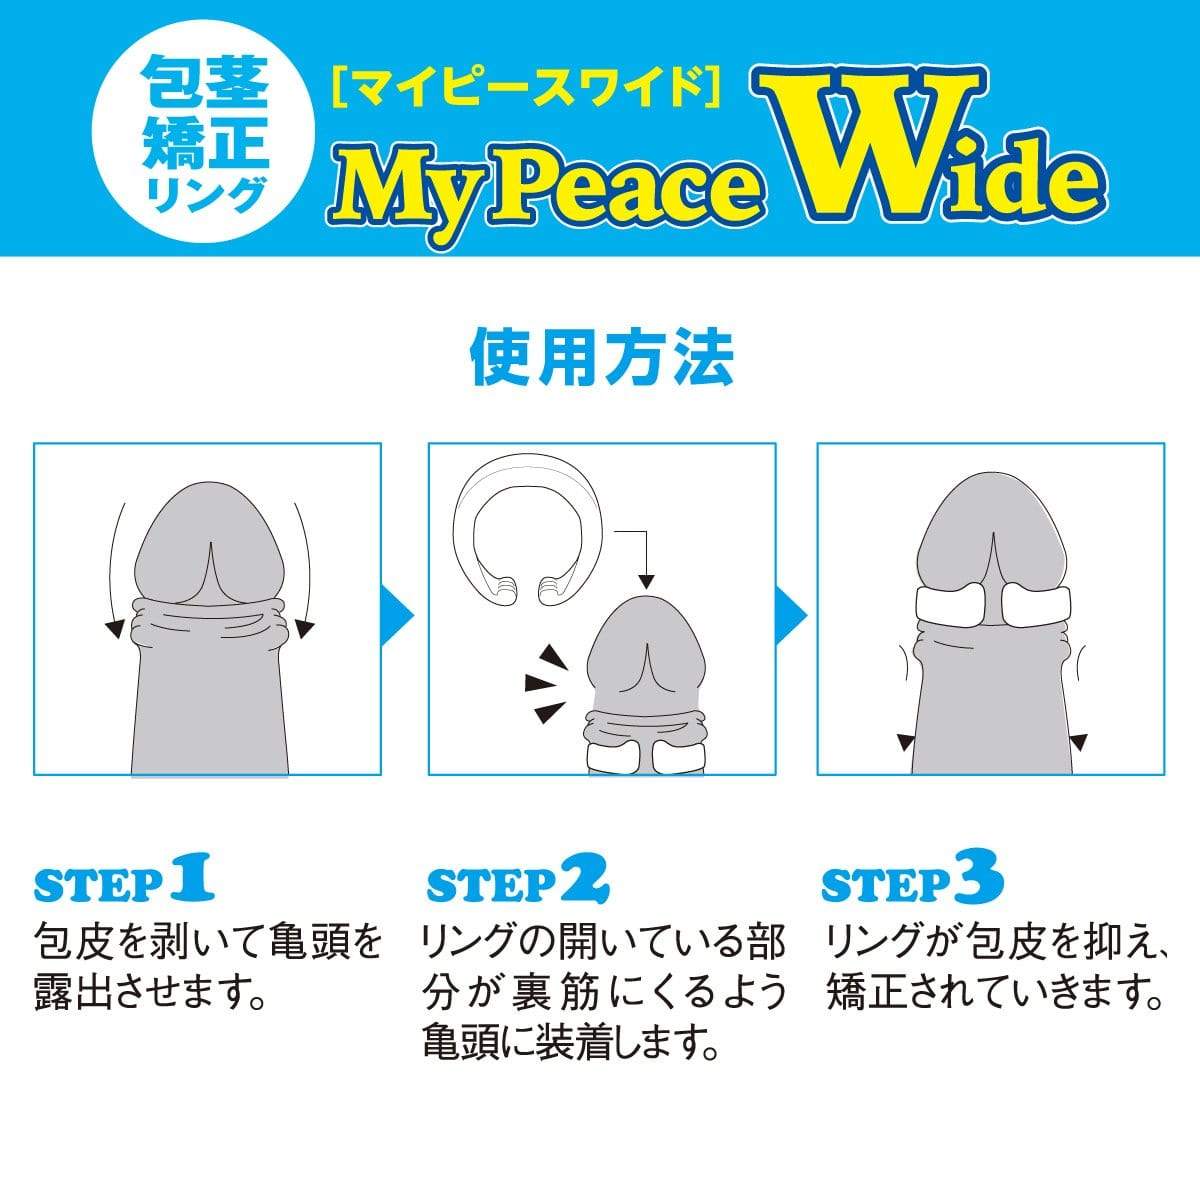 SSI Japan - My Peace Wide Standard Day Size M Correction Cock Ring (Clear) SSI1026 CherryAffairs